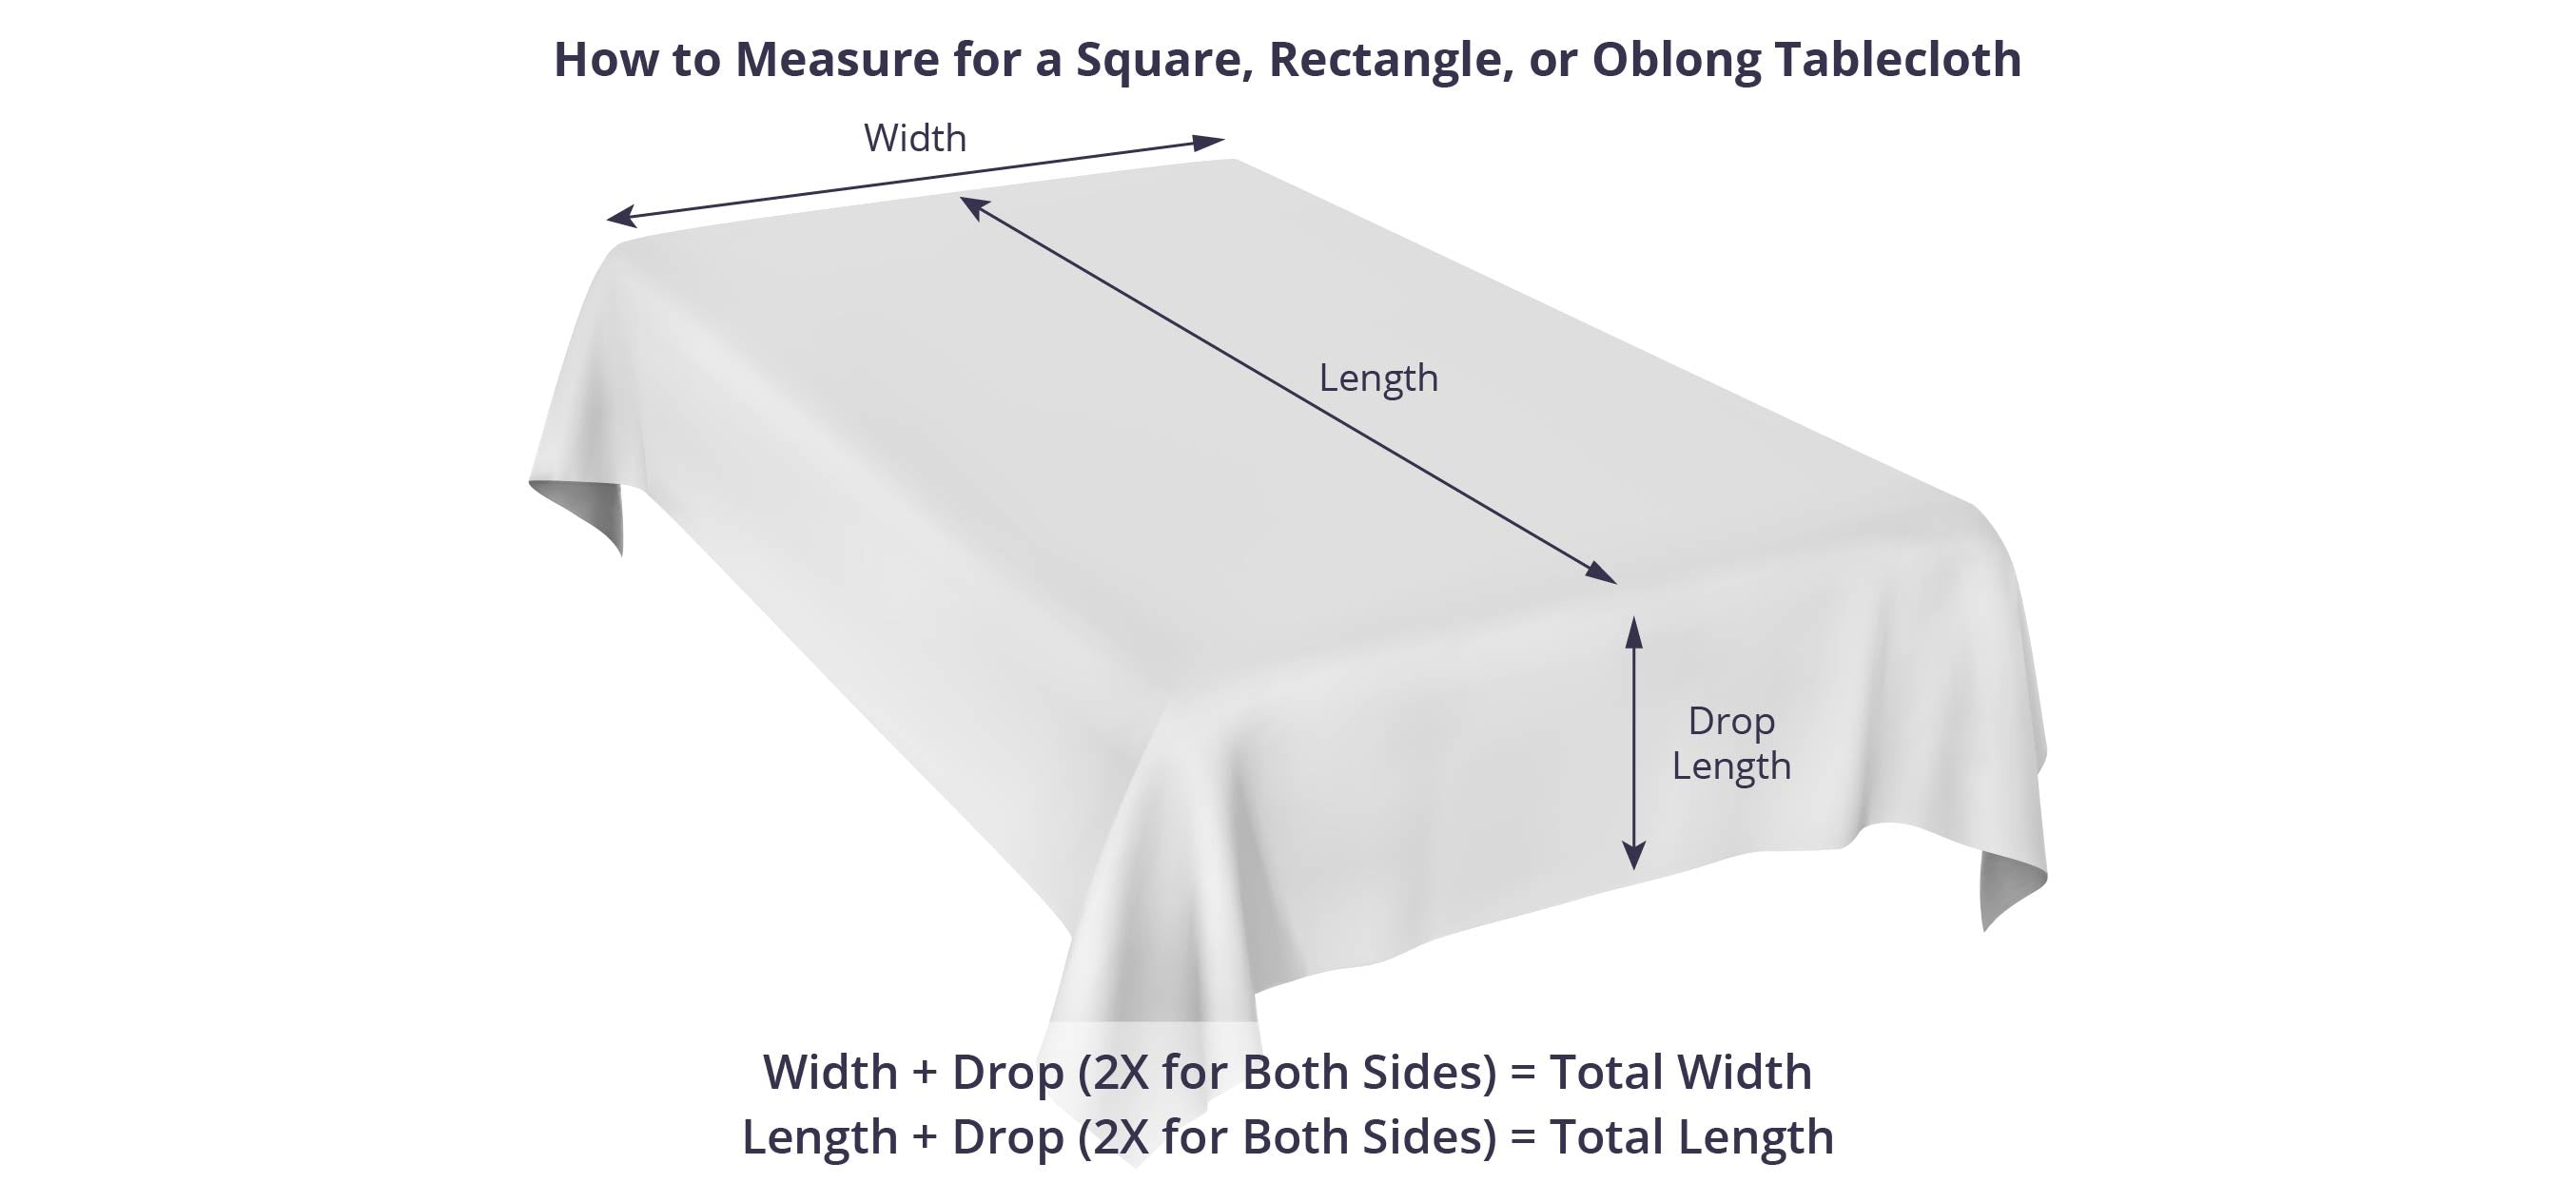 How to Measure for a Square, Rectangle or Oblong Tablecloth